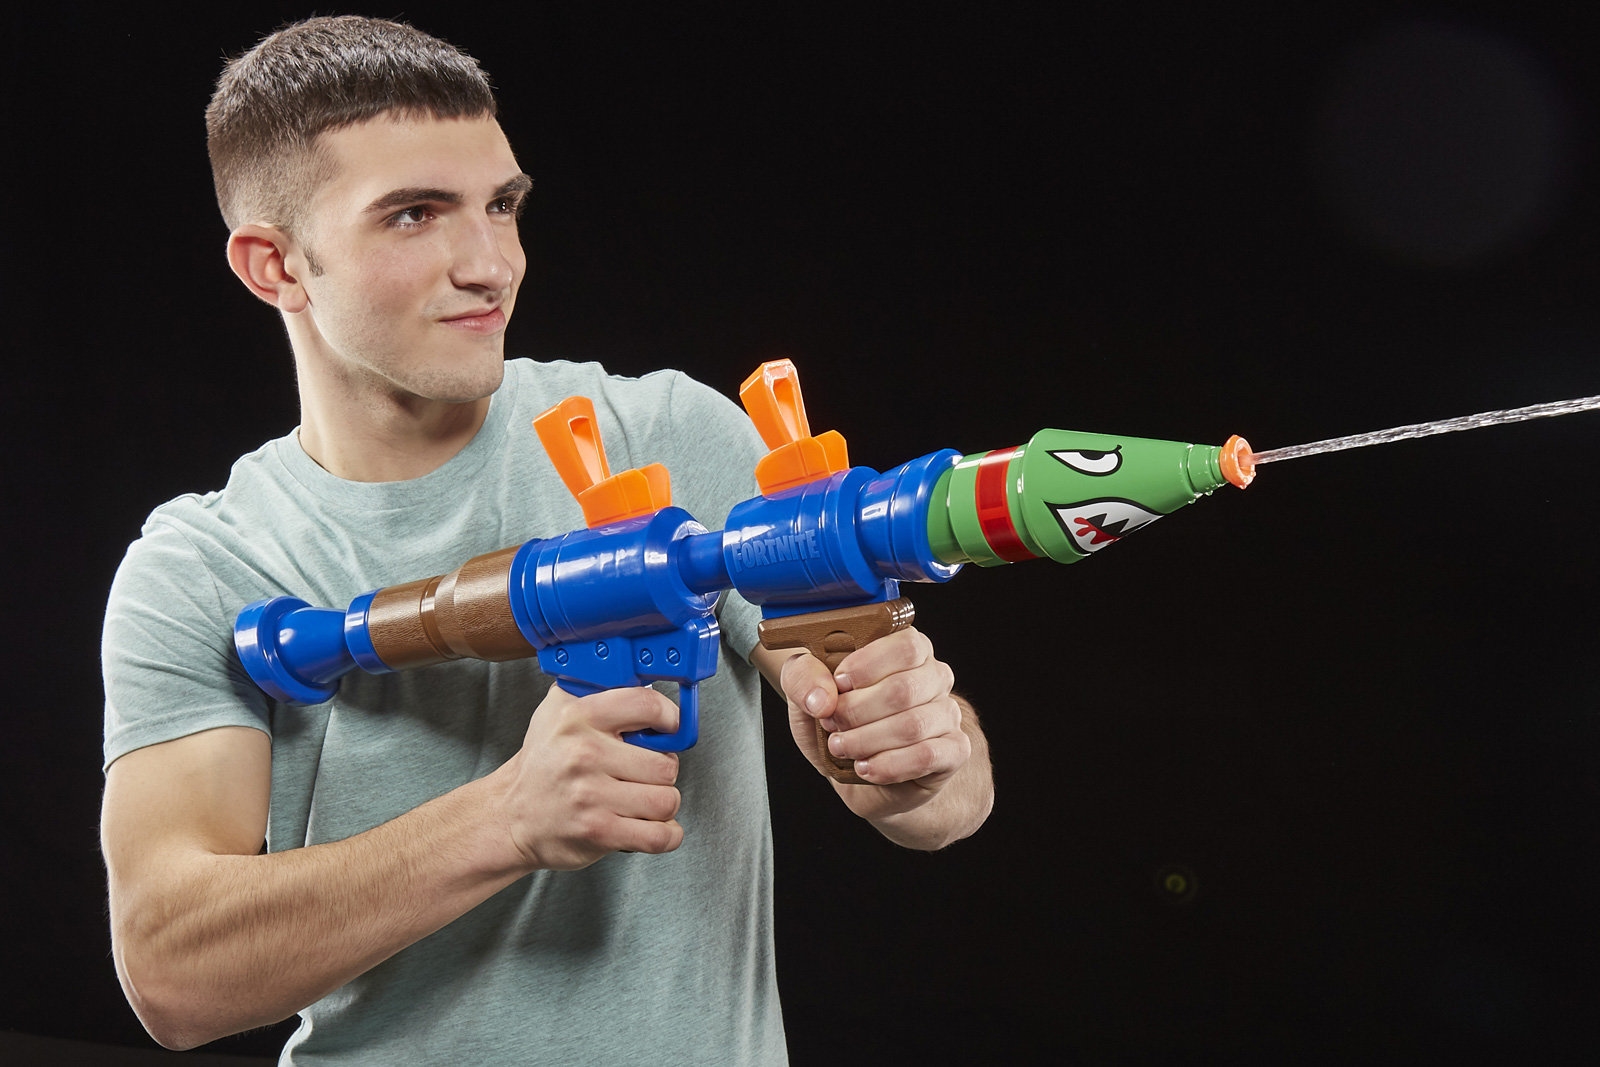 Nerf's 'Fortnite' guns will be here March 22nd | DeviceDaily.com